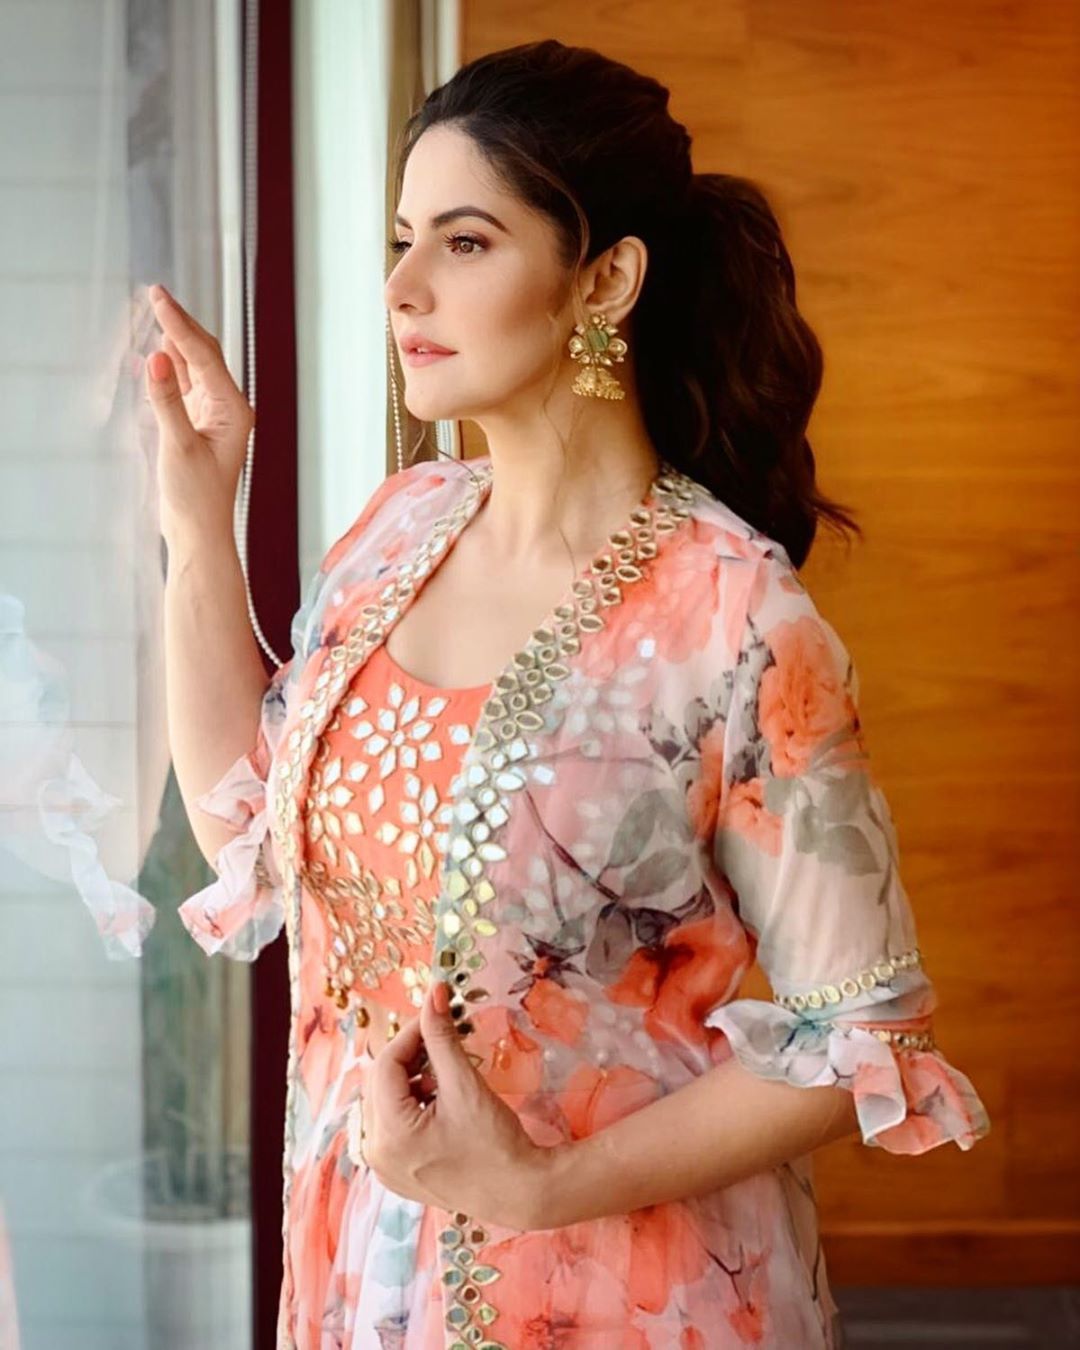 Zareen Khan On Initial Failure, Being Called Katrina Kaif’s Look Alike: The Comments On My Looks, My Body Were Suffocating